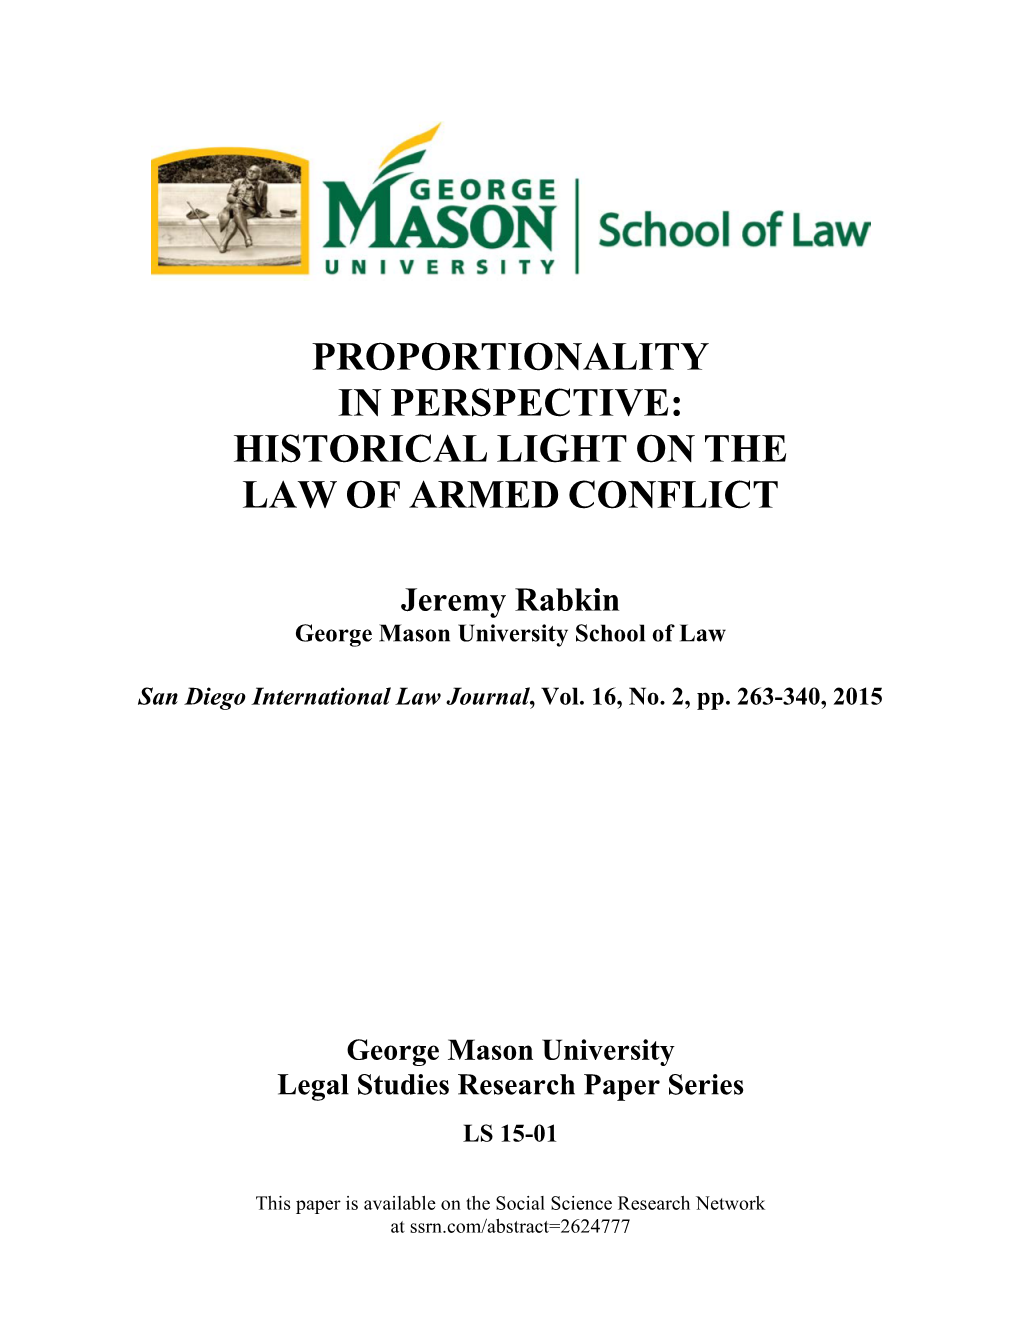 Proportionality in Perspective: Historical Light on the Law of Armed Conflict